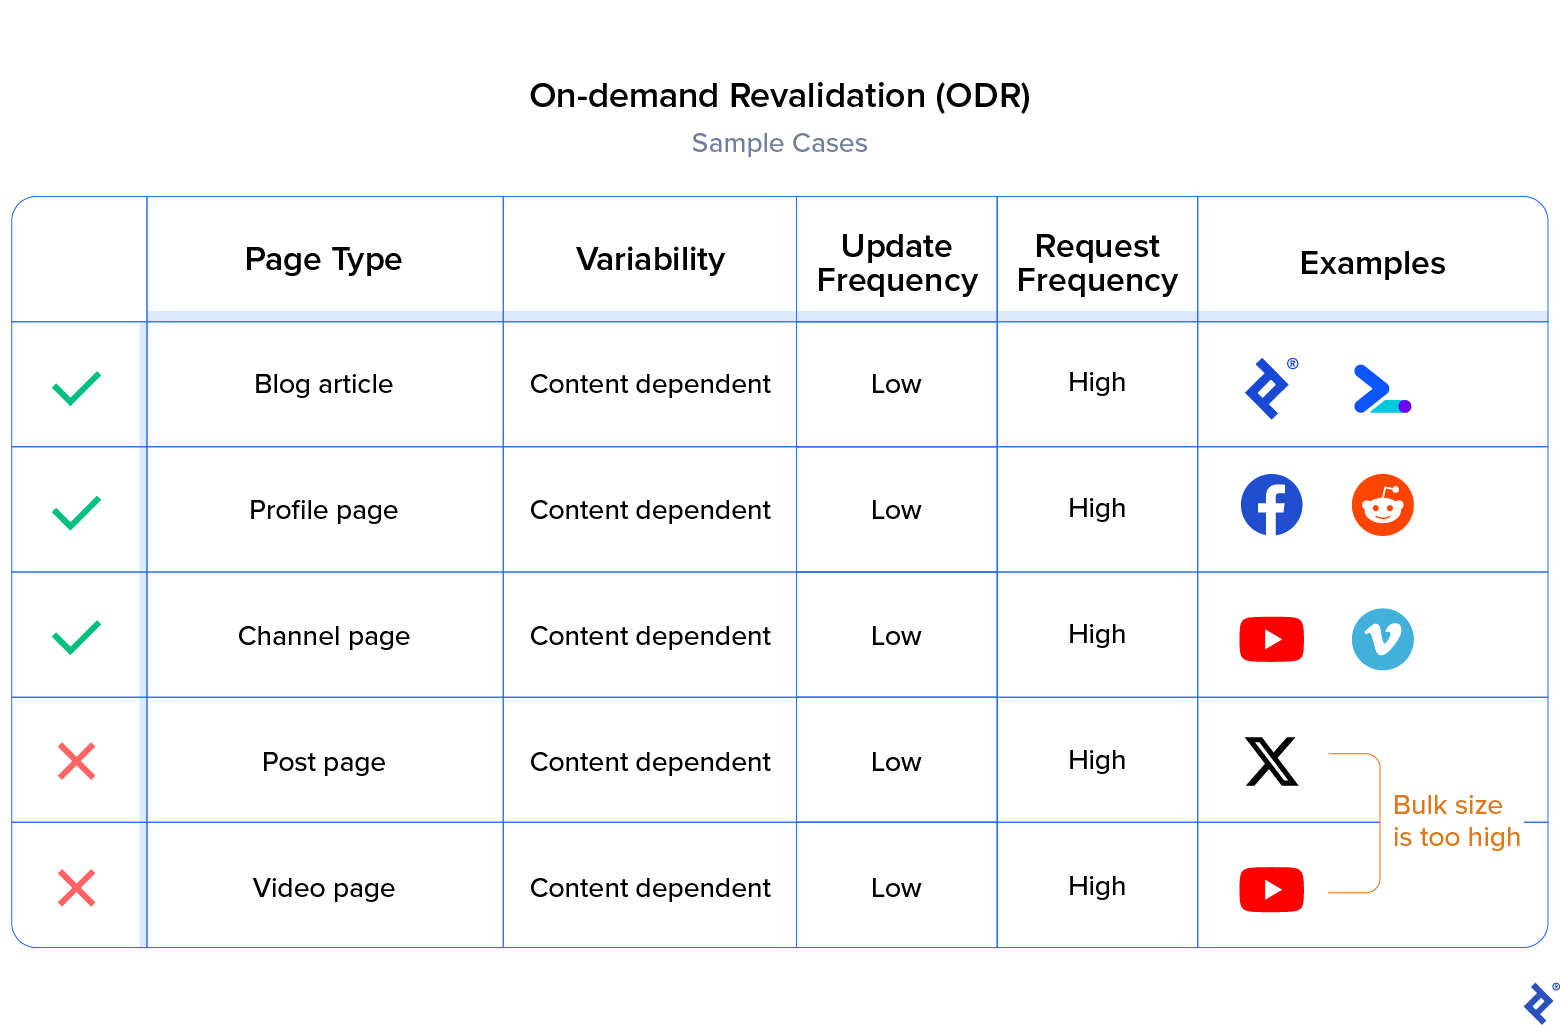 Examples of on-demand static revalidation cases depending on page type, variability, update frequency, and request frequency, including Toptal, Vimeo, and YouTube.